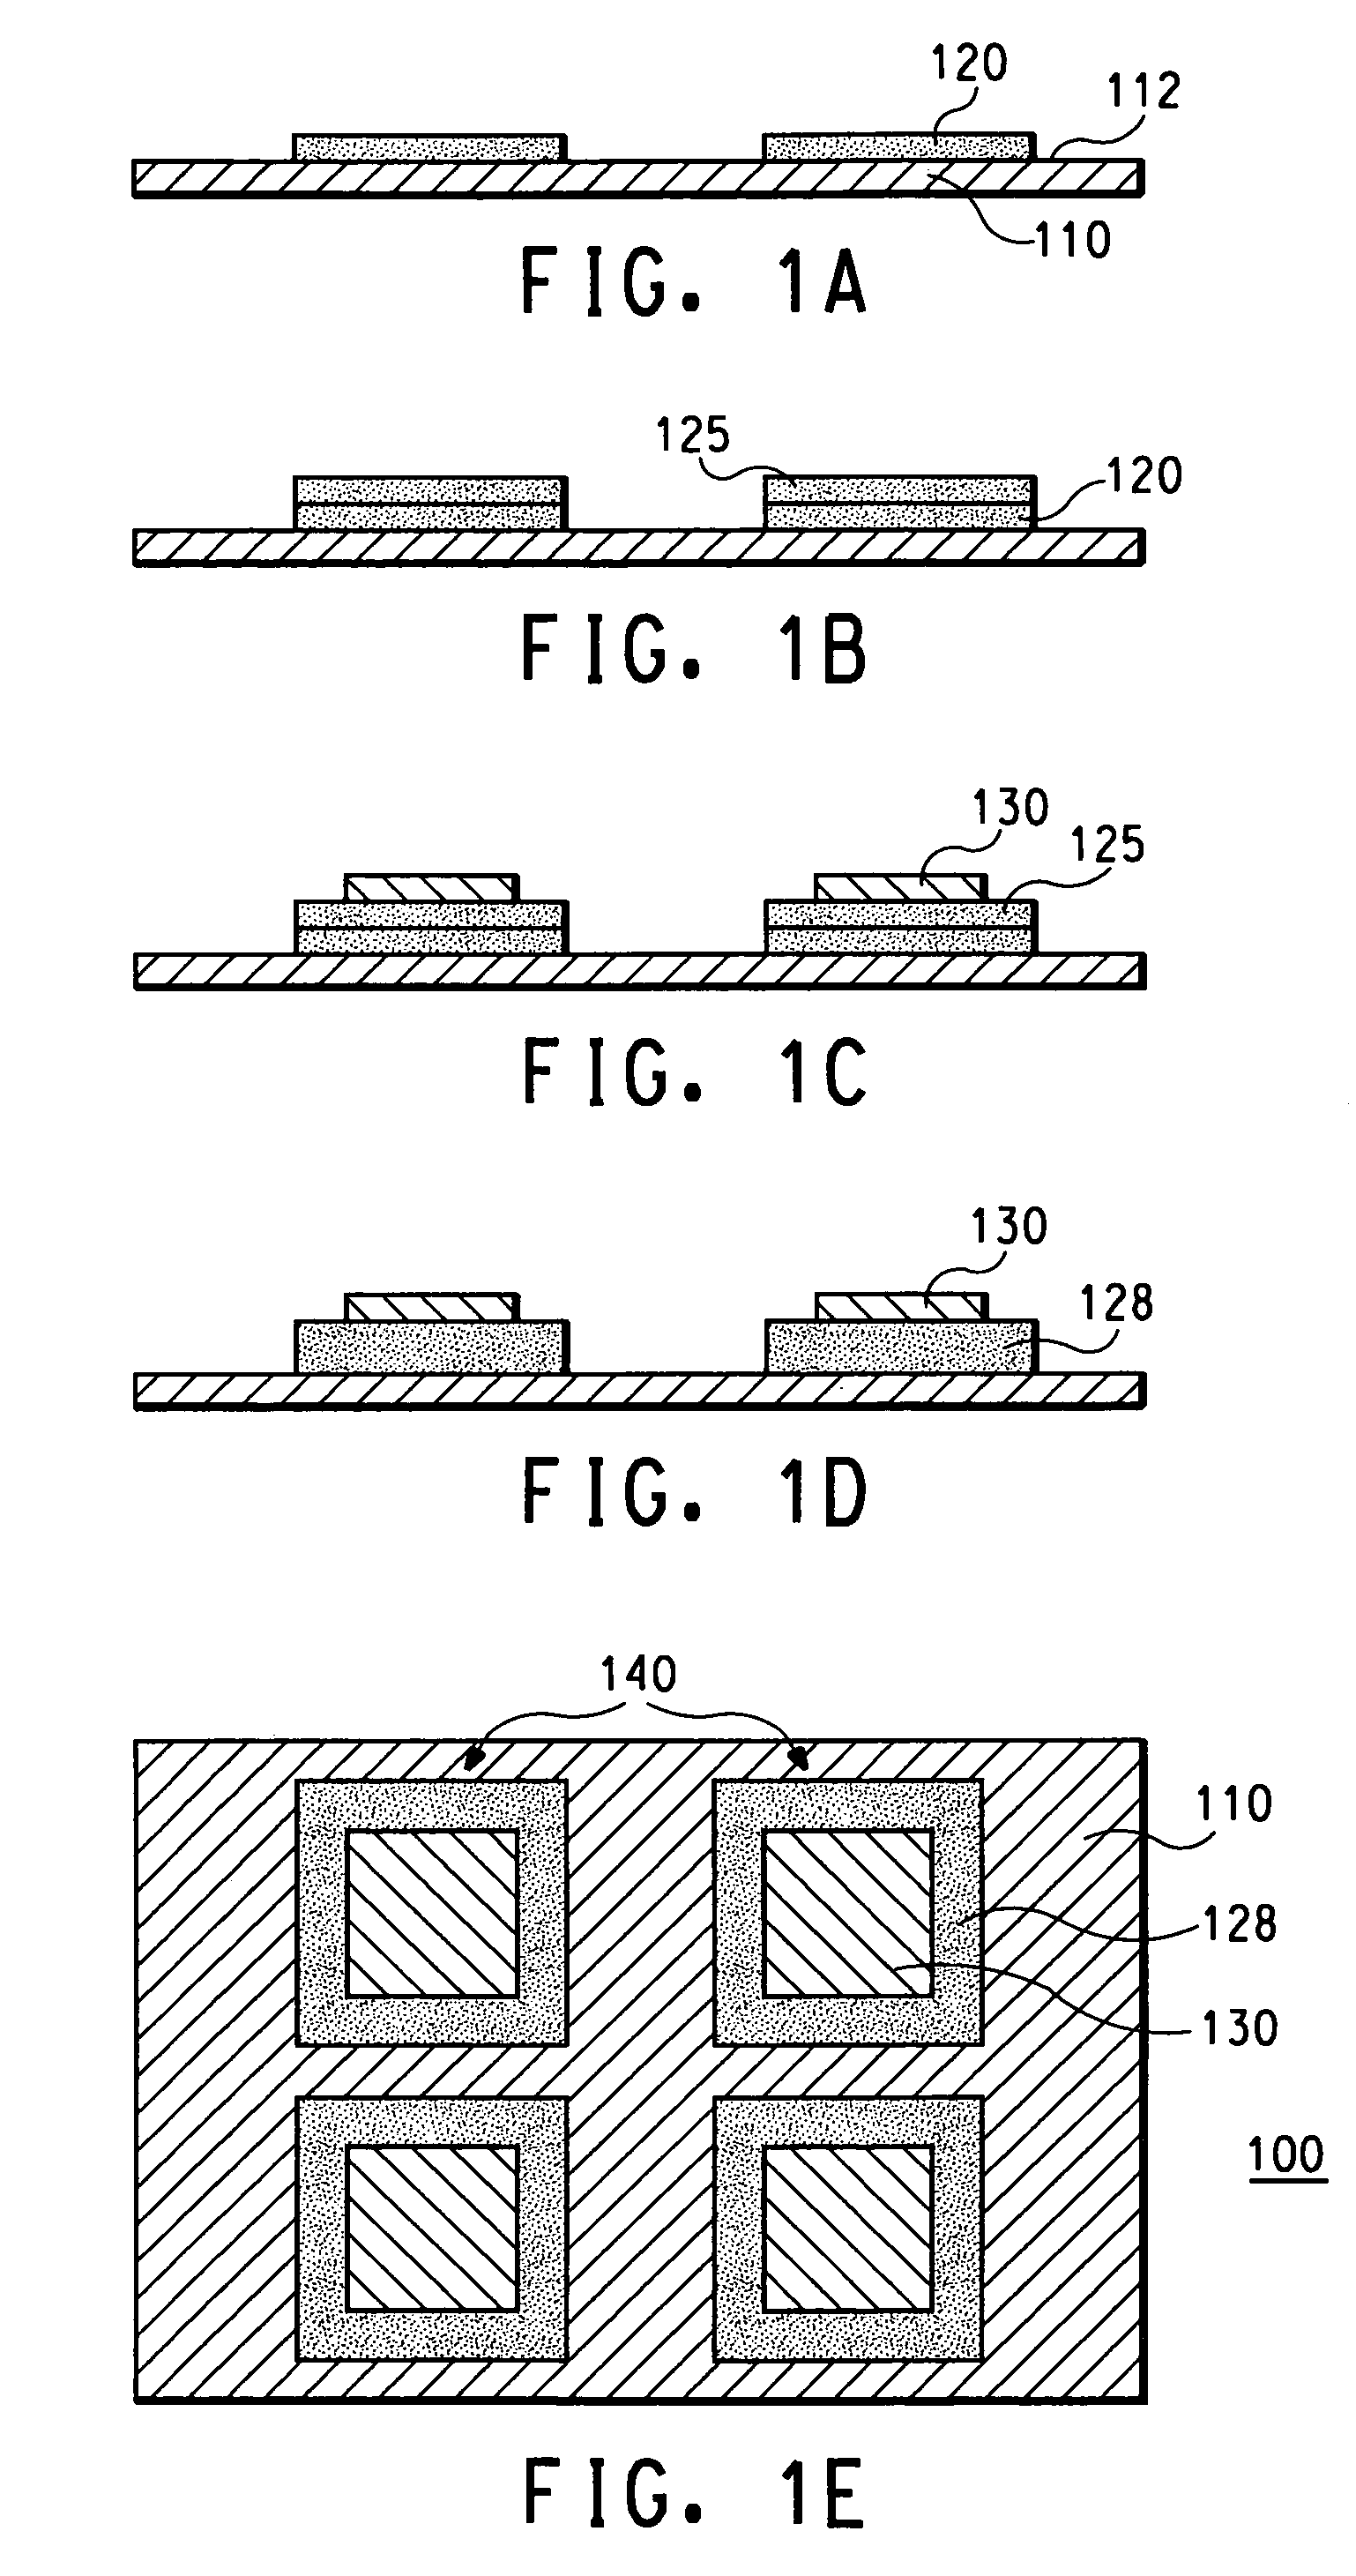 Co-fired ceramic capacitor and method for forming ceramic capacitors for use in printed wiring boards